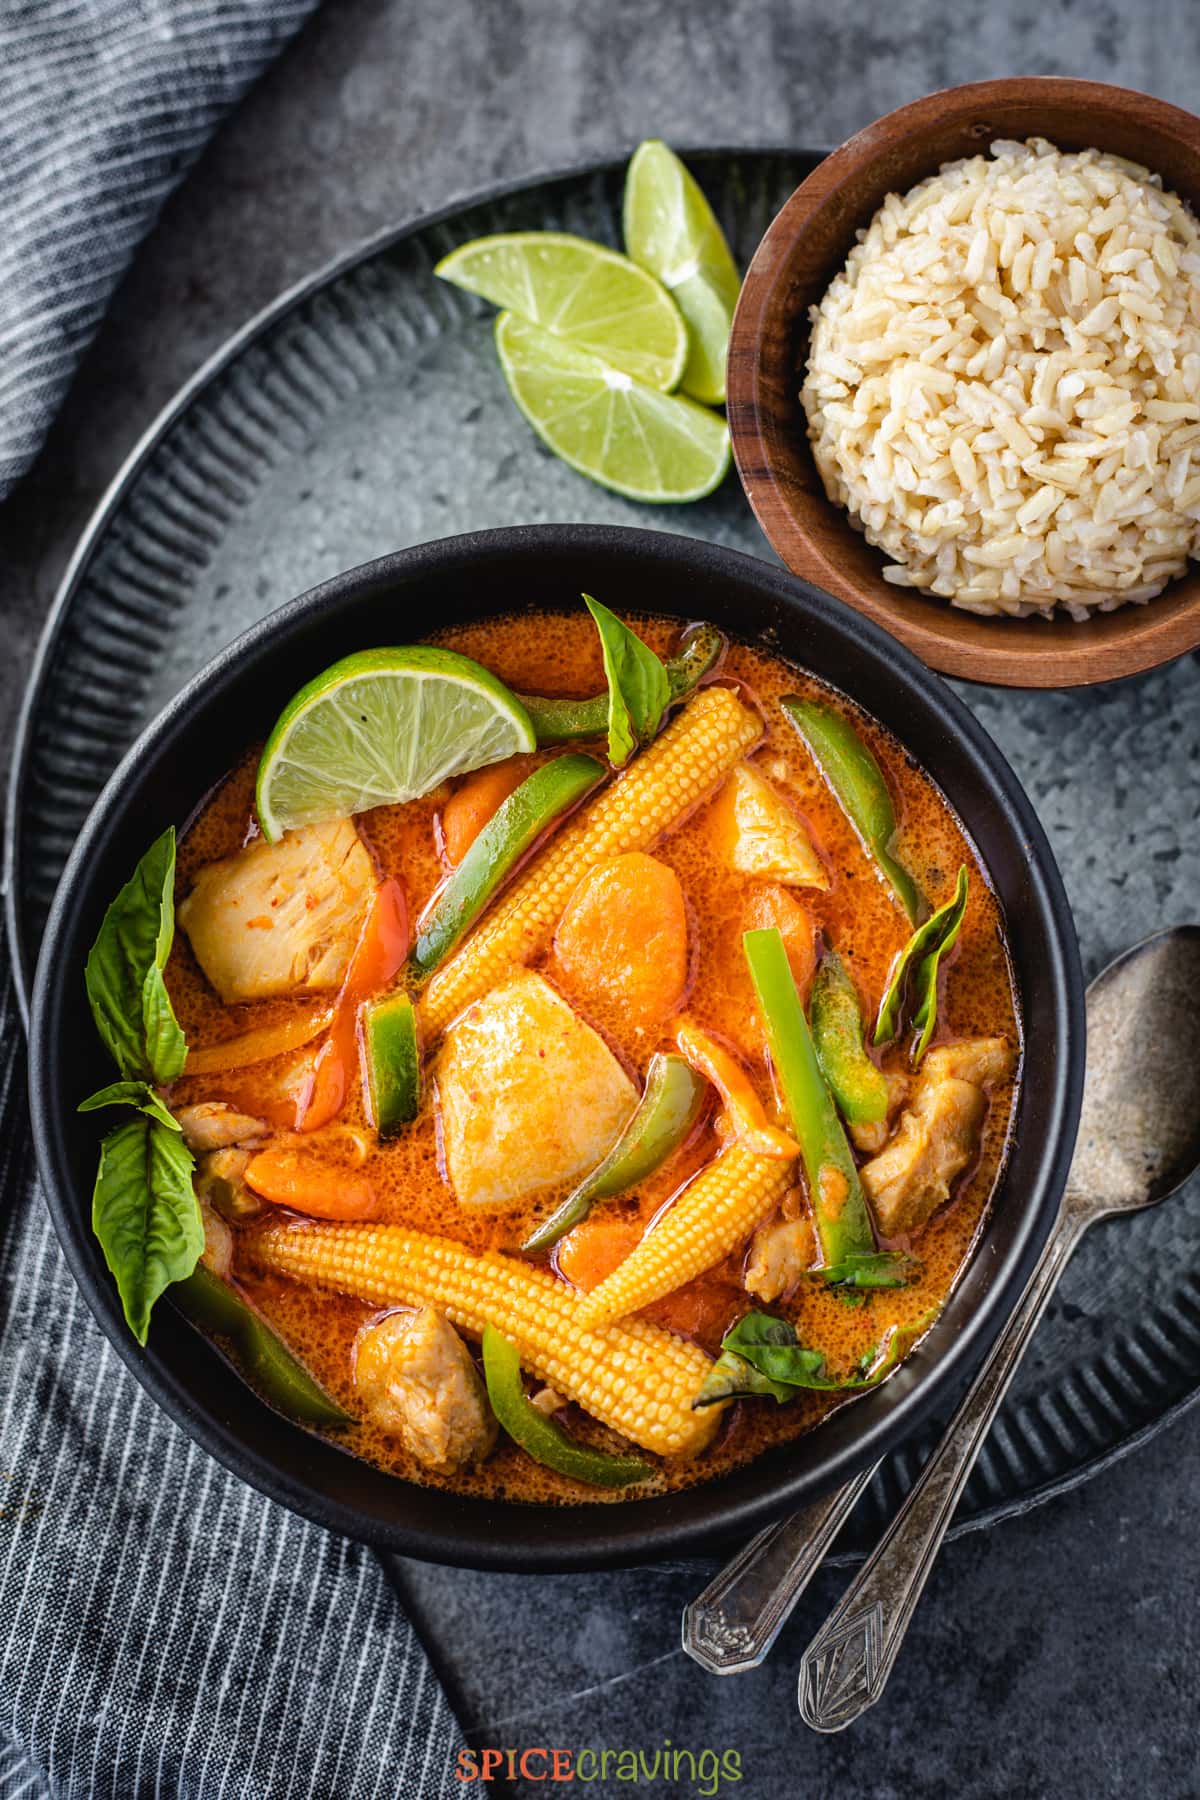 Thai panang curry served with brown jasmine rice in a black bowl